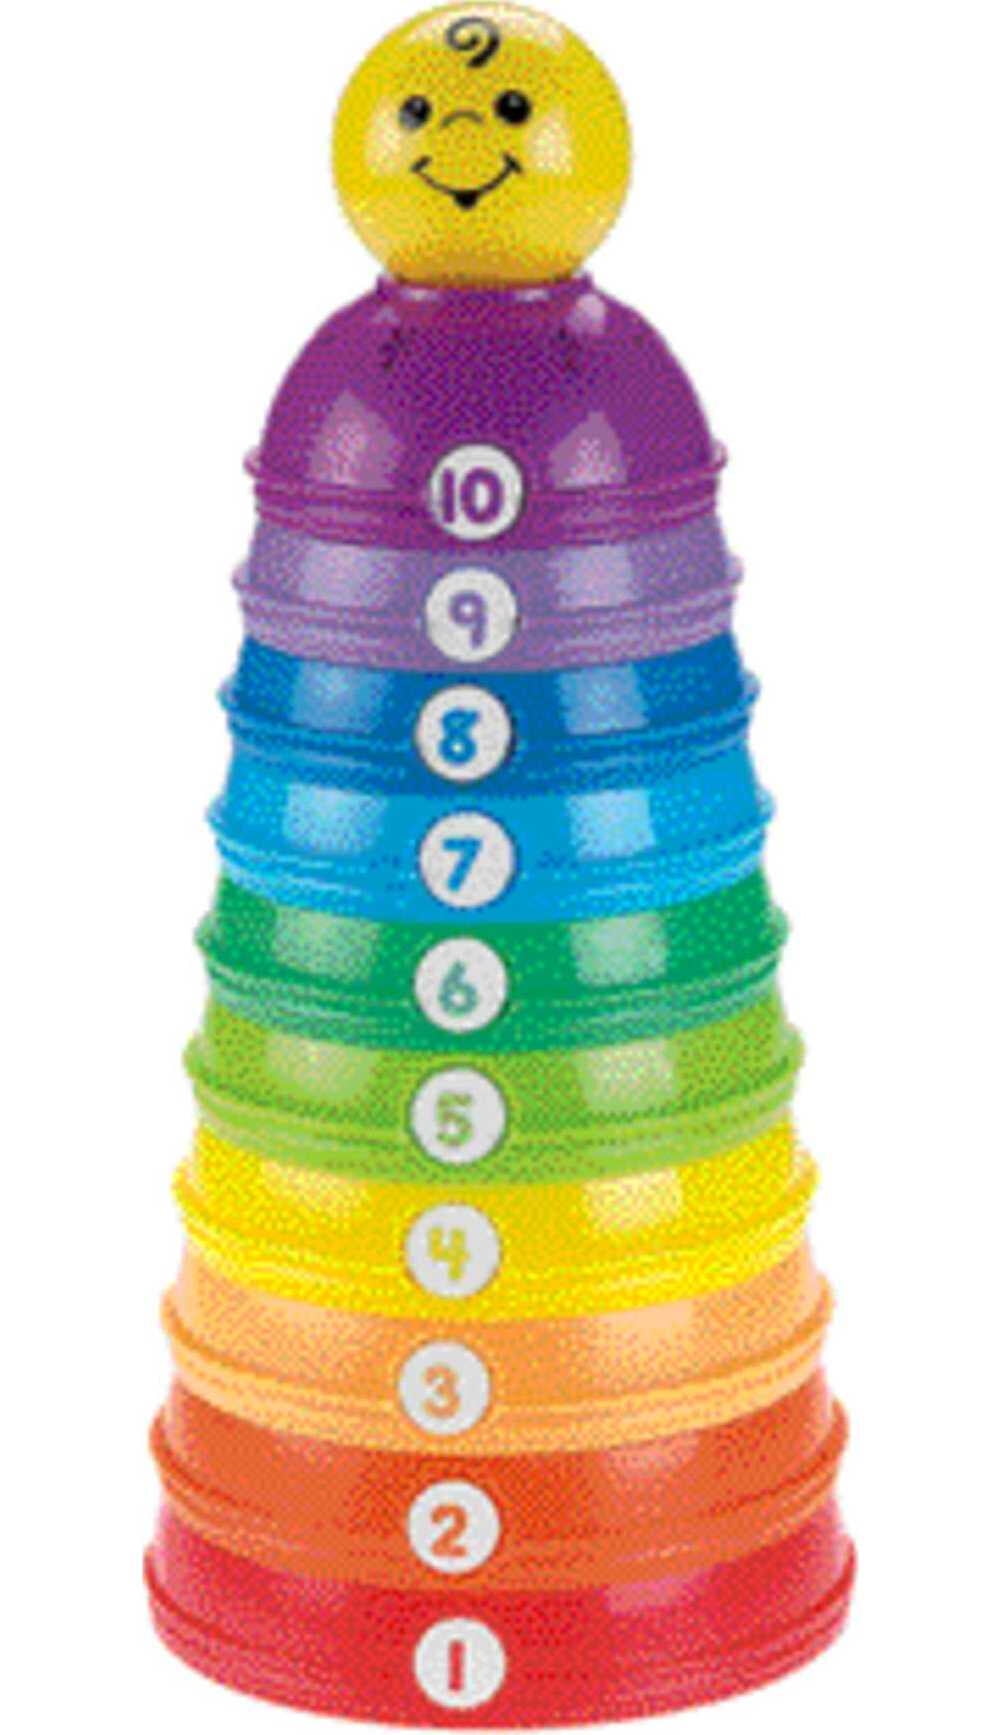 Fisher-Price Baby Stacking & Nesting Stack & Roll Cups, Set of 10 Toys for Infants